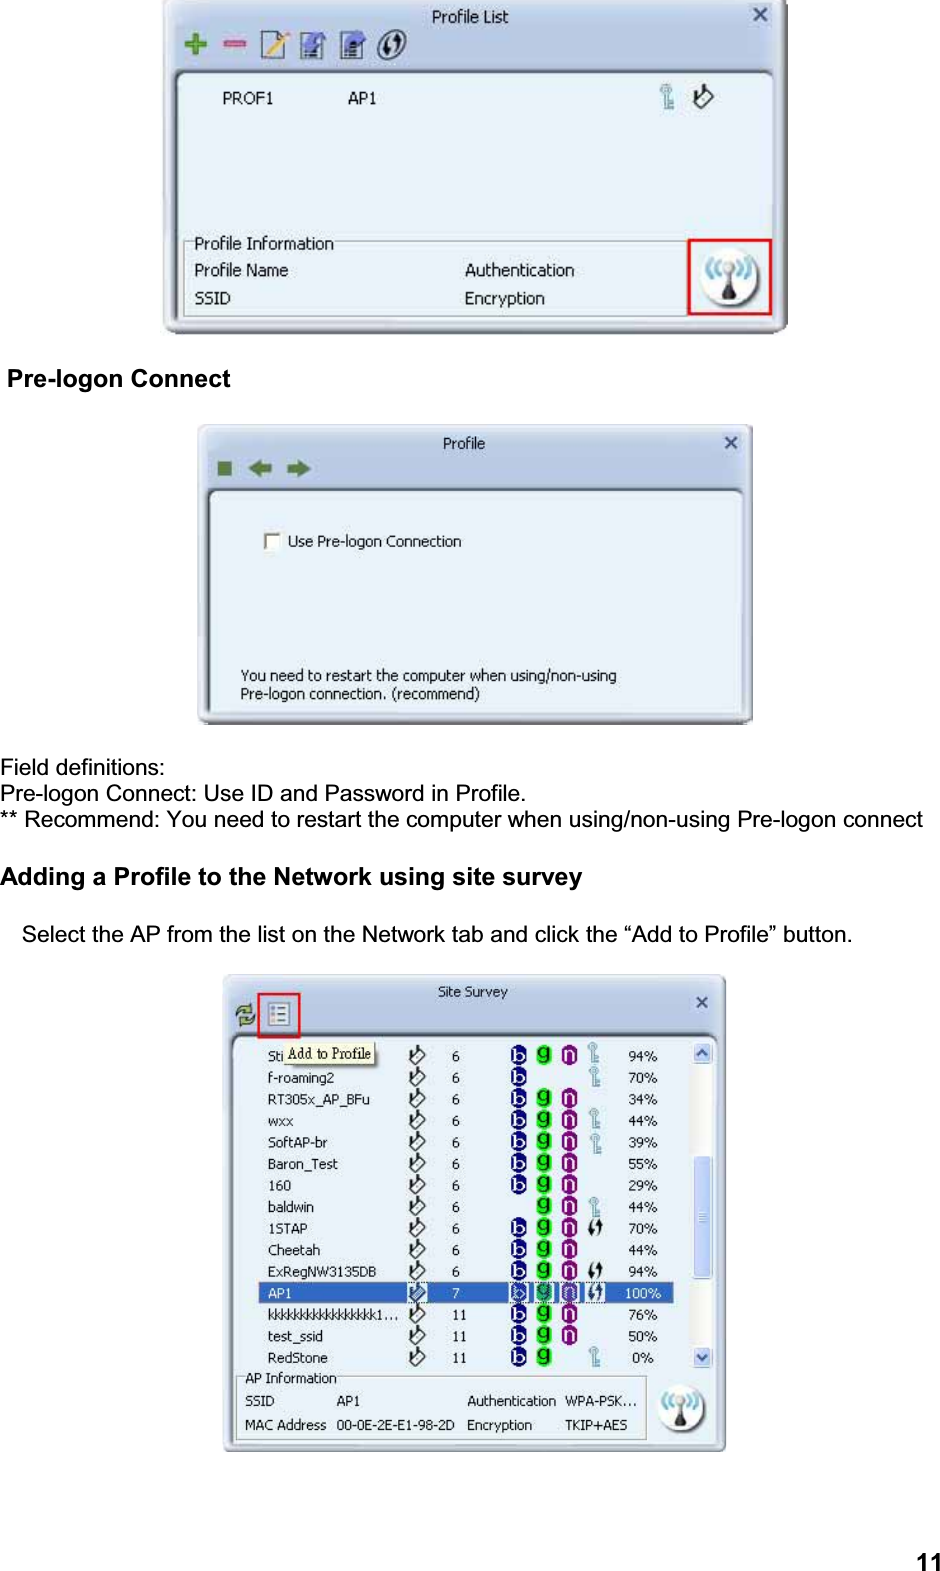 11Pre-logon ConnectField definitions:Pre-logon Connect: Use ID and Password in Profile.** Recommend: You need to restart the computer when using/non-using Pre-logon connectAdding a Profile to the Network using site surveySelect the AP from the list on the Network tab and click the “Add to Profile” button.